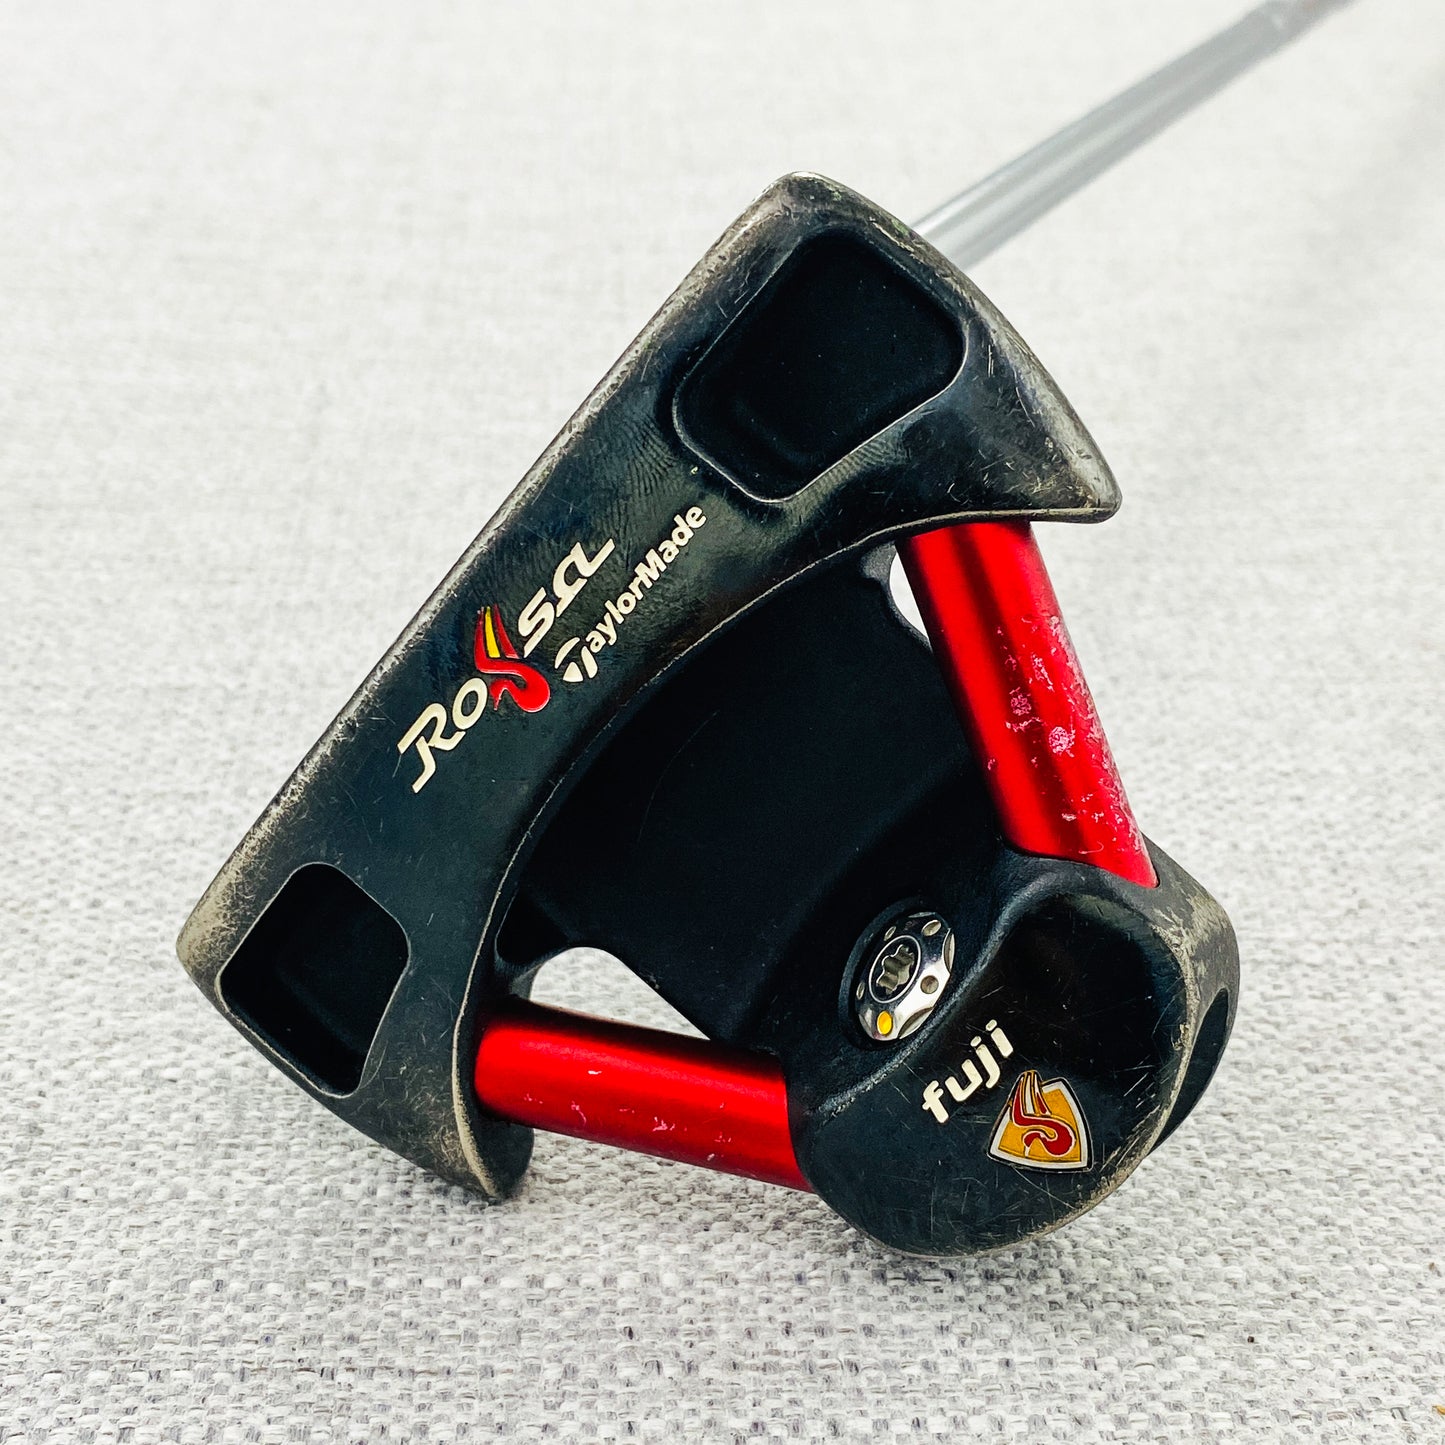 TaylorMade Rossa Fuji Putter. 33 inch - Average Condition # GP191